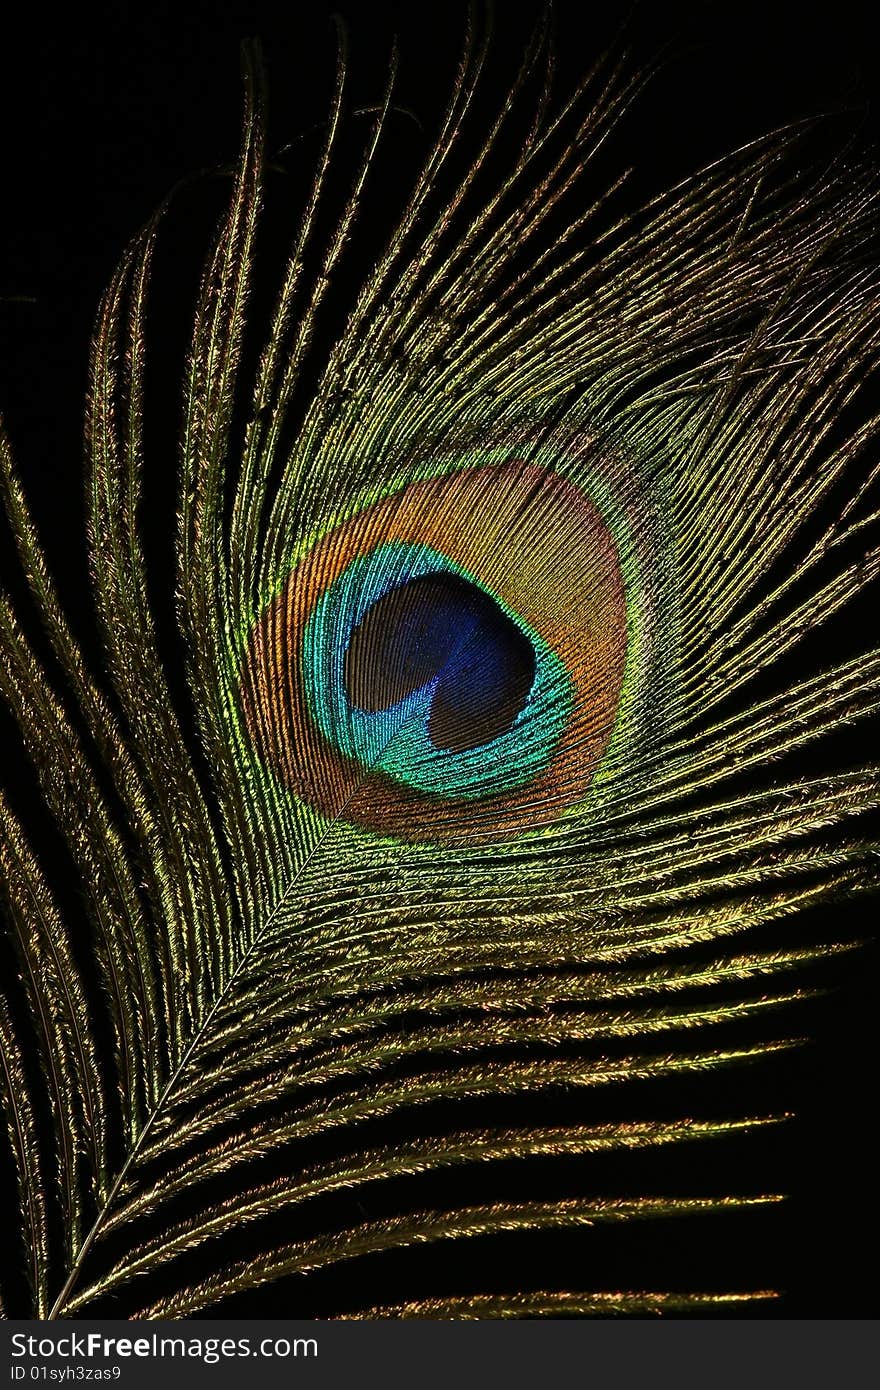 Classical feather of a peacock. The peacock eye. Classical feather of a peacock. The peacock eye